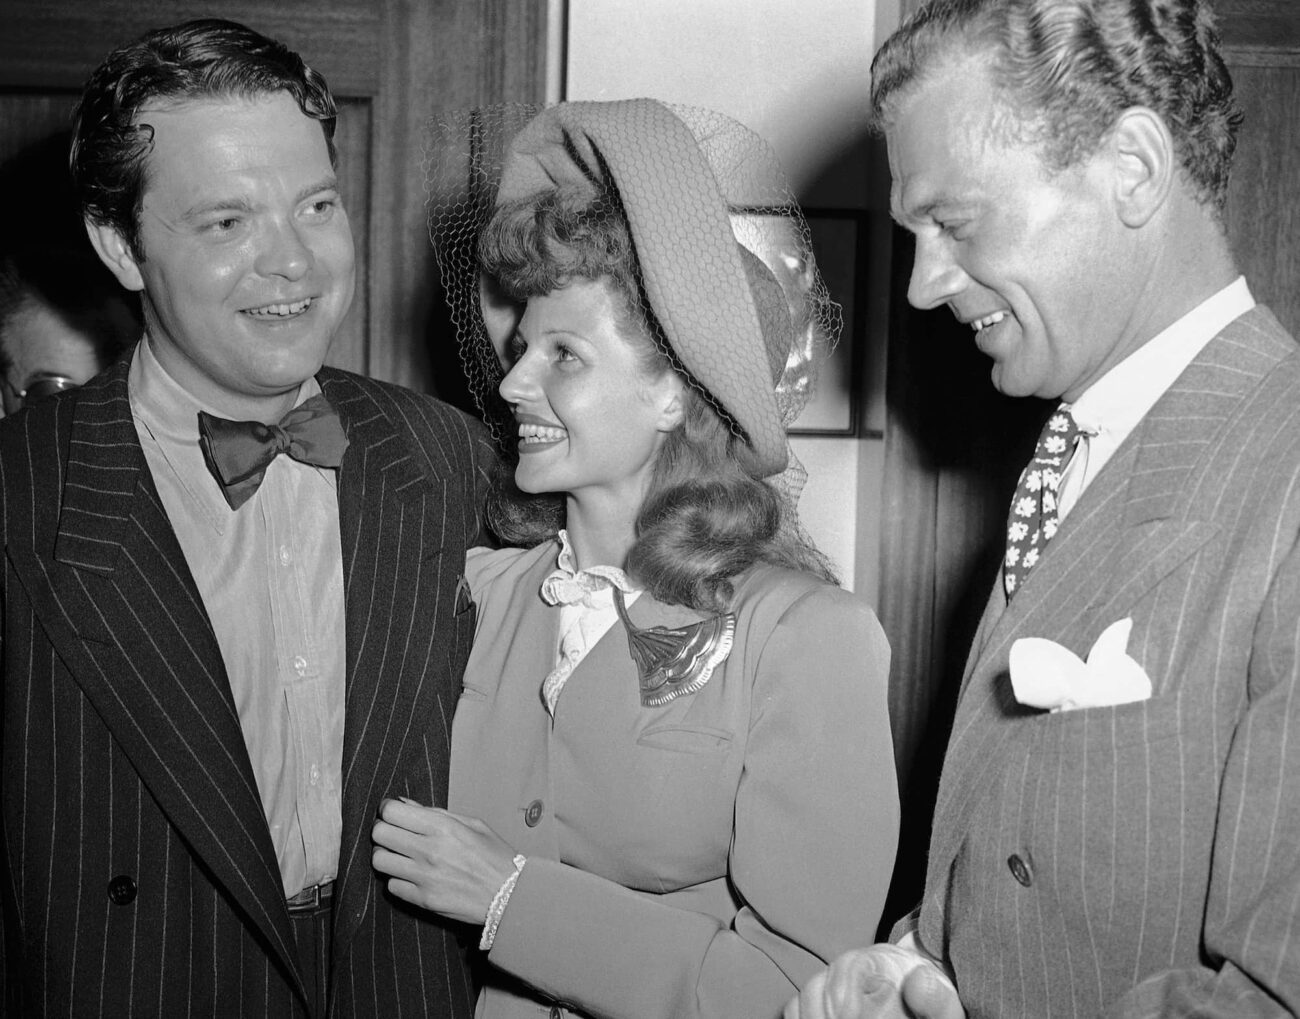 A spur-of-the-moment marriage ended in heartache for one of Hollywood's most beloved actresses. Read about the marriage of Rita Hayworth and Orson Welles.